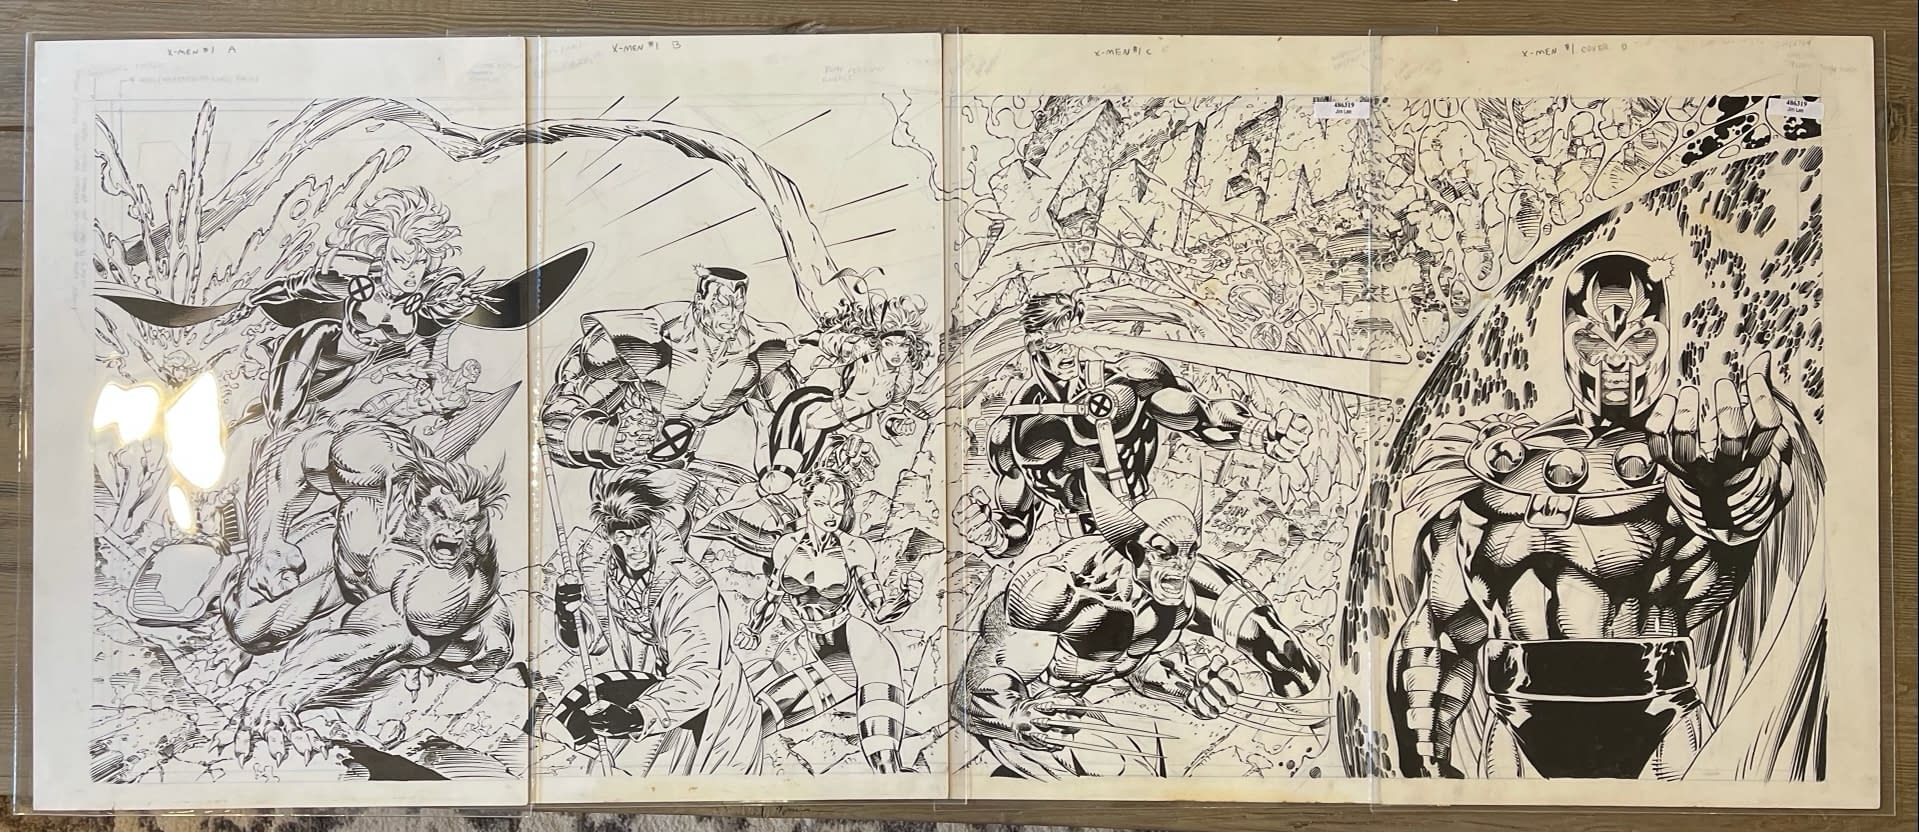 Jim Lee X-Men #1 Original Cover Art Was Bought To Match The Rest Of It